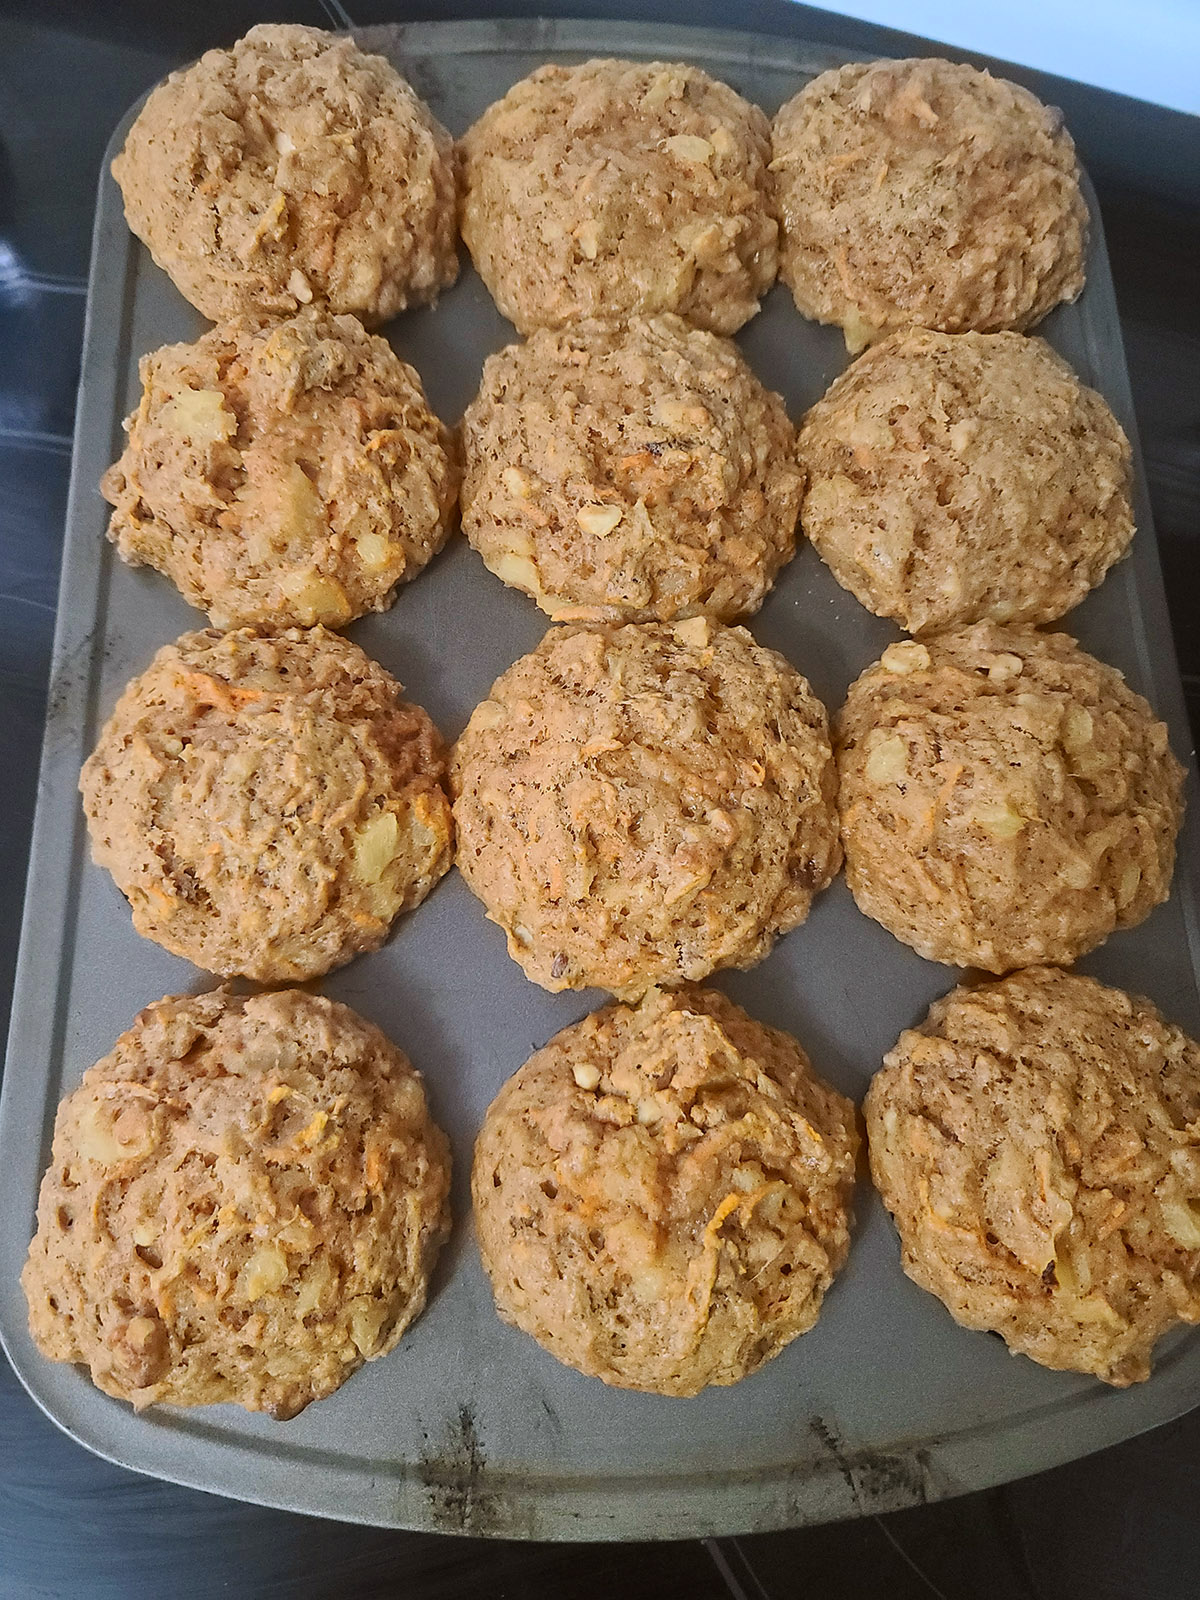 A pan of 12 carrot cake muffins, fresh from the oven.